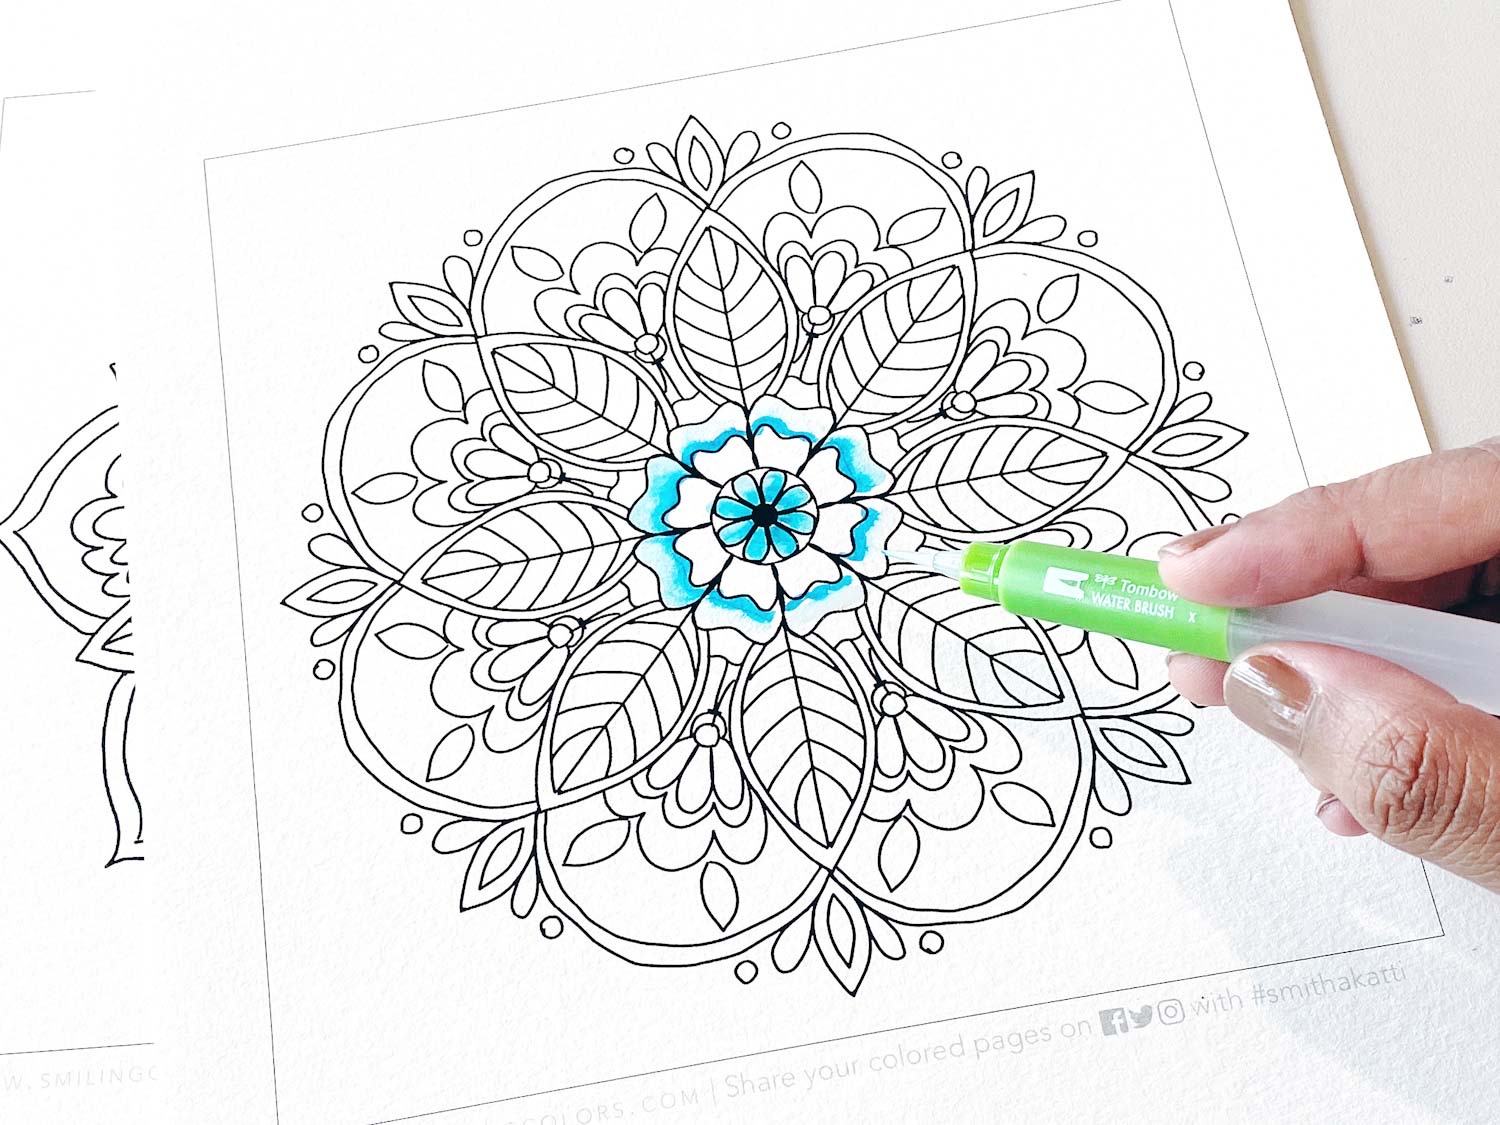 Gorgeous Free Coloring Pages for Adults and a Chance to Win Tombow Markers  - Easy Peasy and Fun